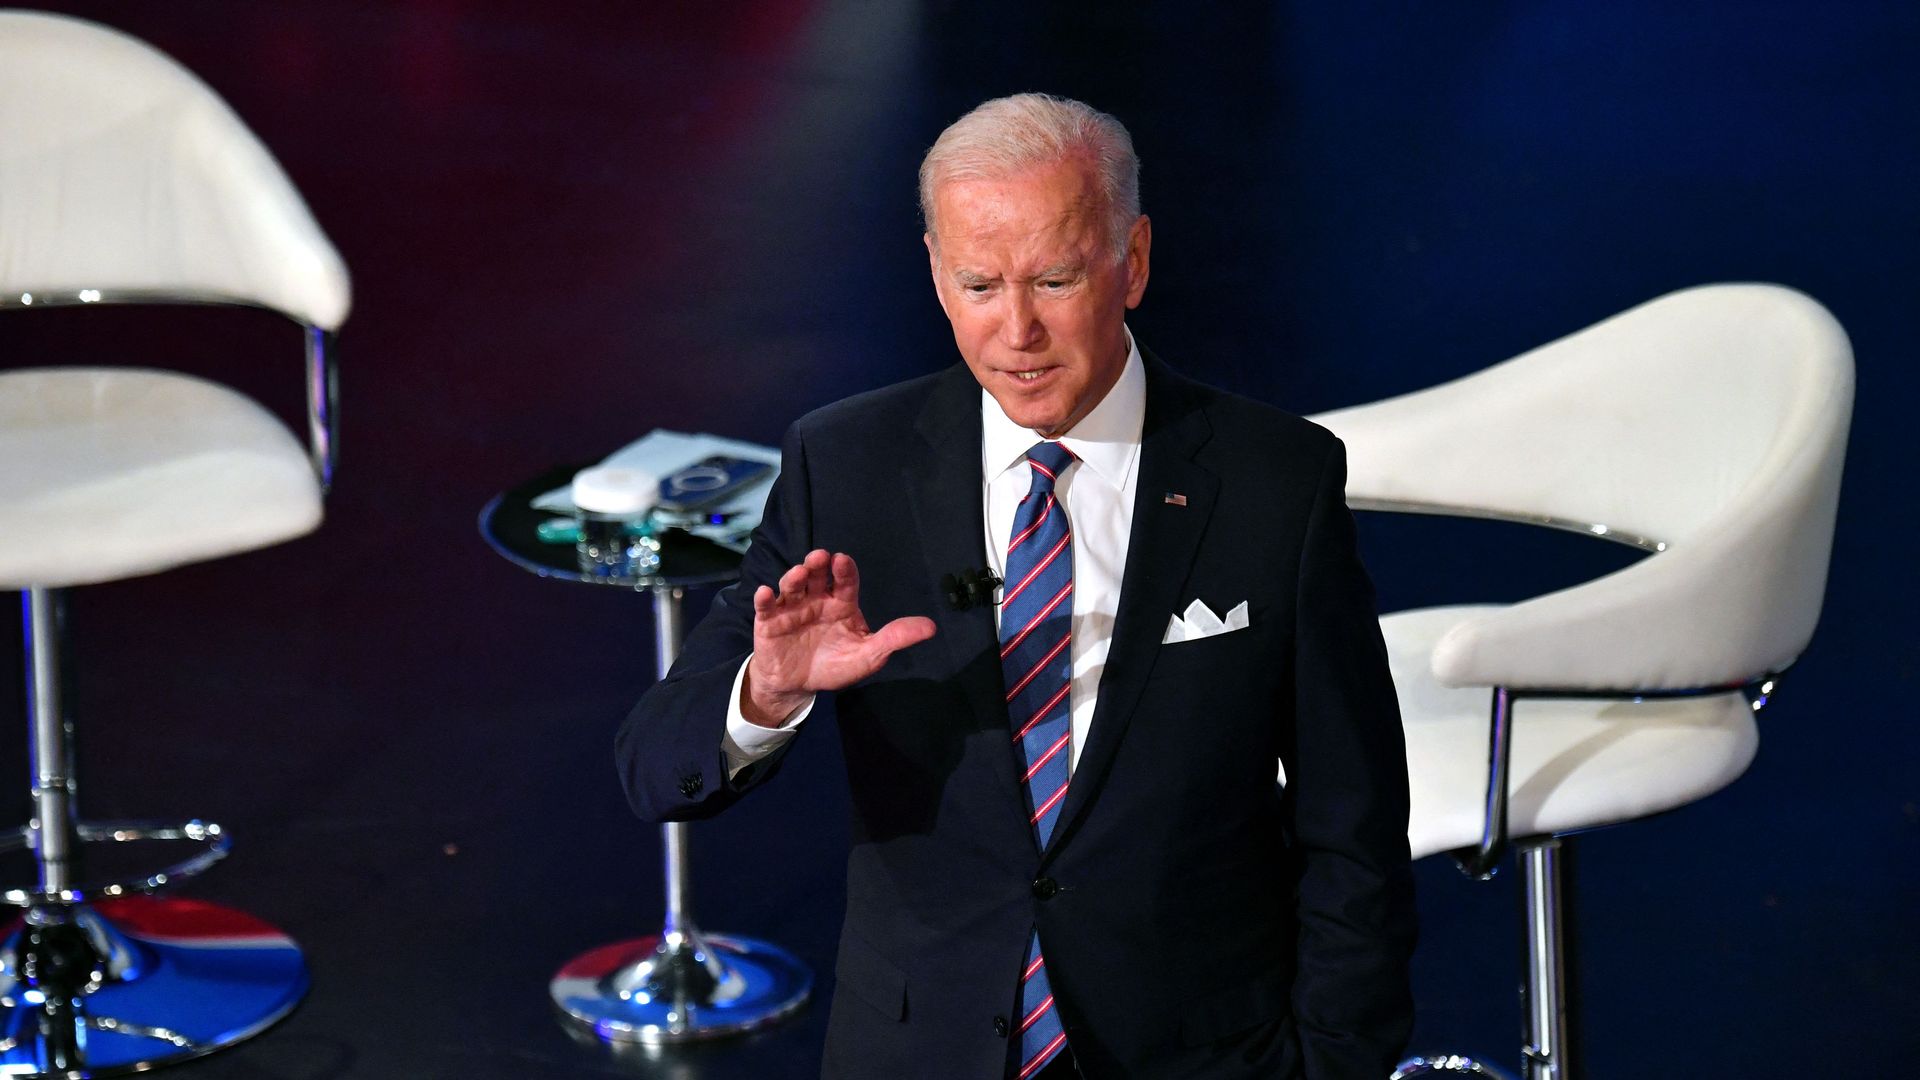 Photo of Joe Biden speaking on a stage with his right hand raised